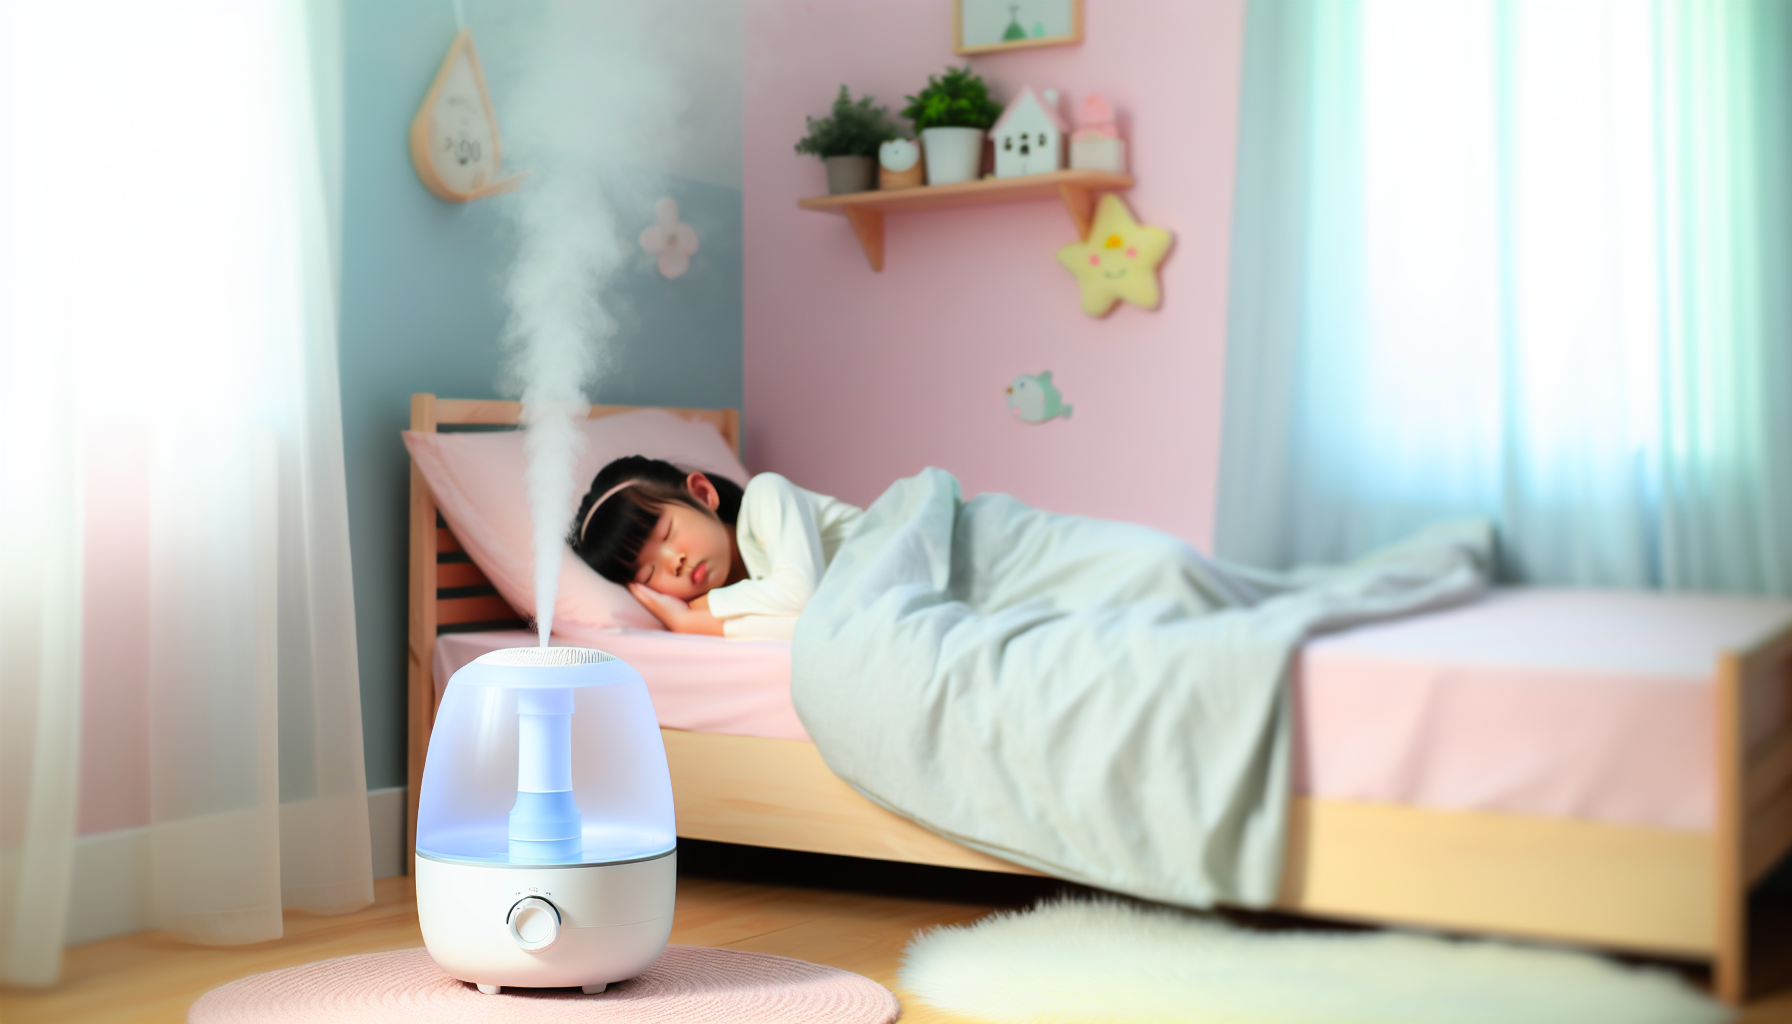 Child sleeping peacefully in a room with a cool mist humidifier